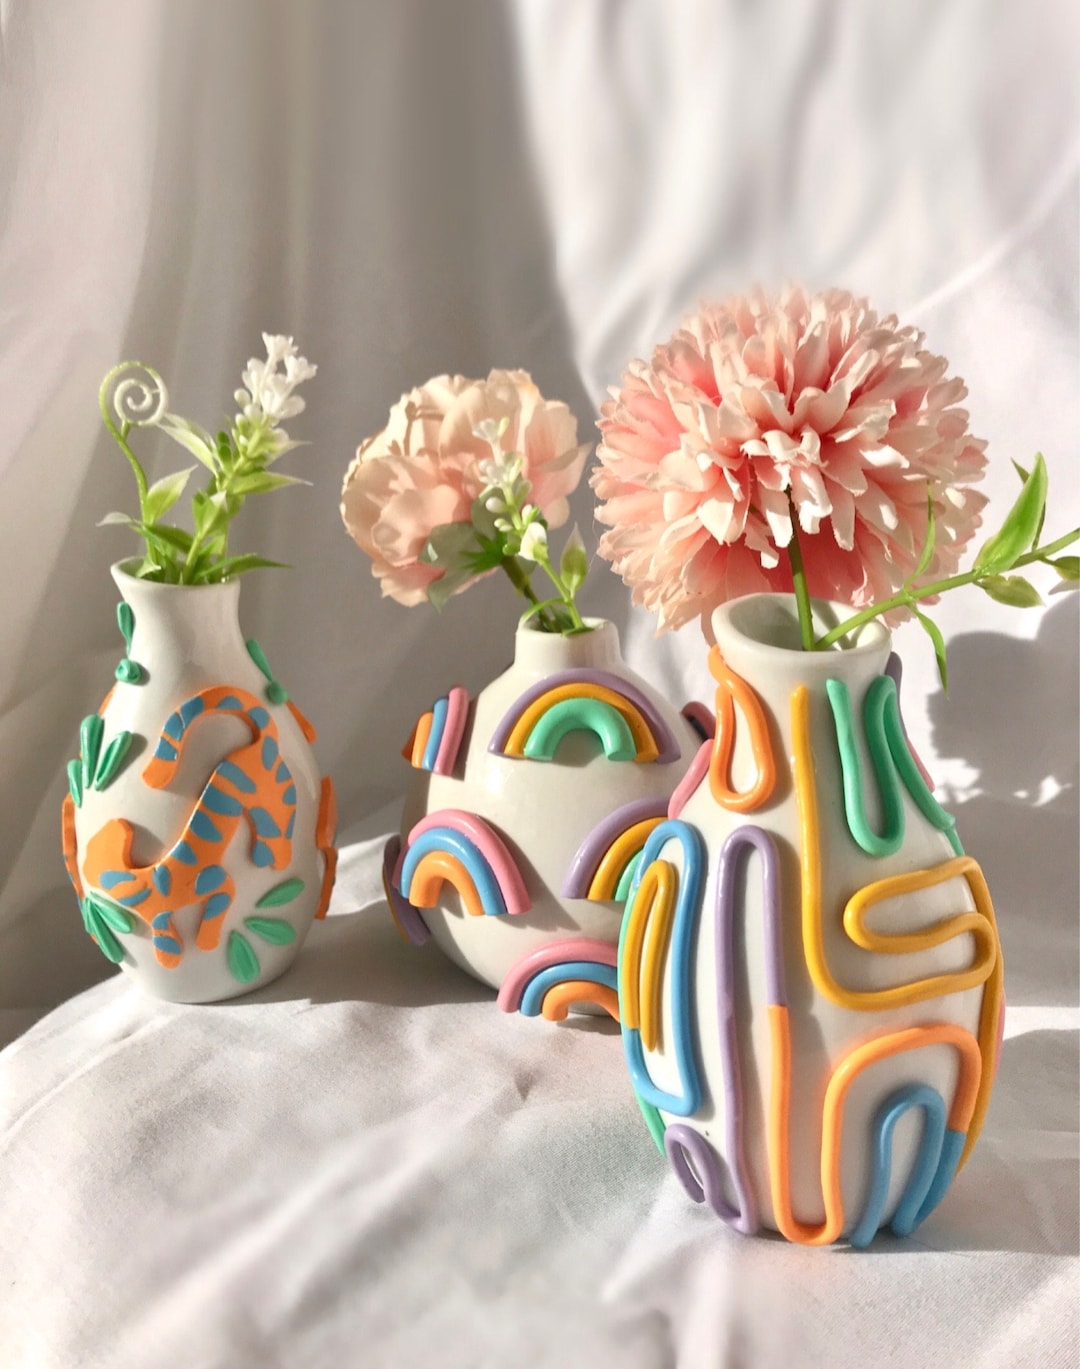 10 Creative Vase Painting Ideas to Brighten Your Home Decor插图4